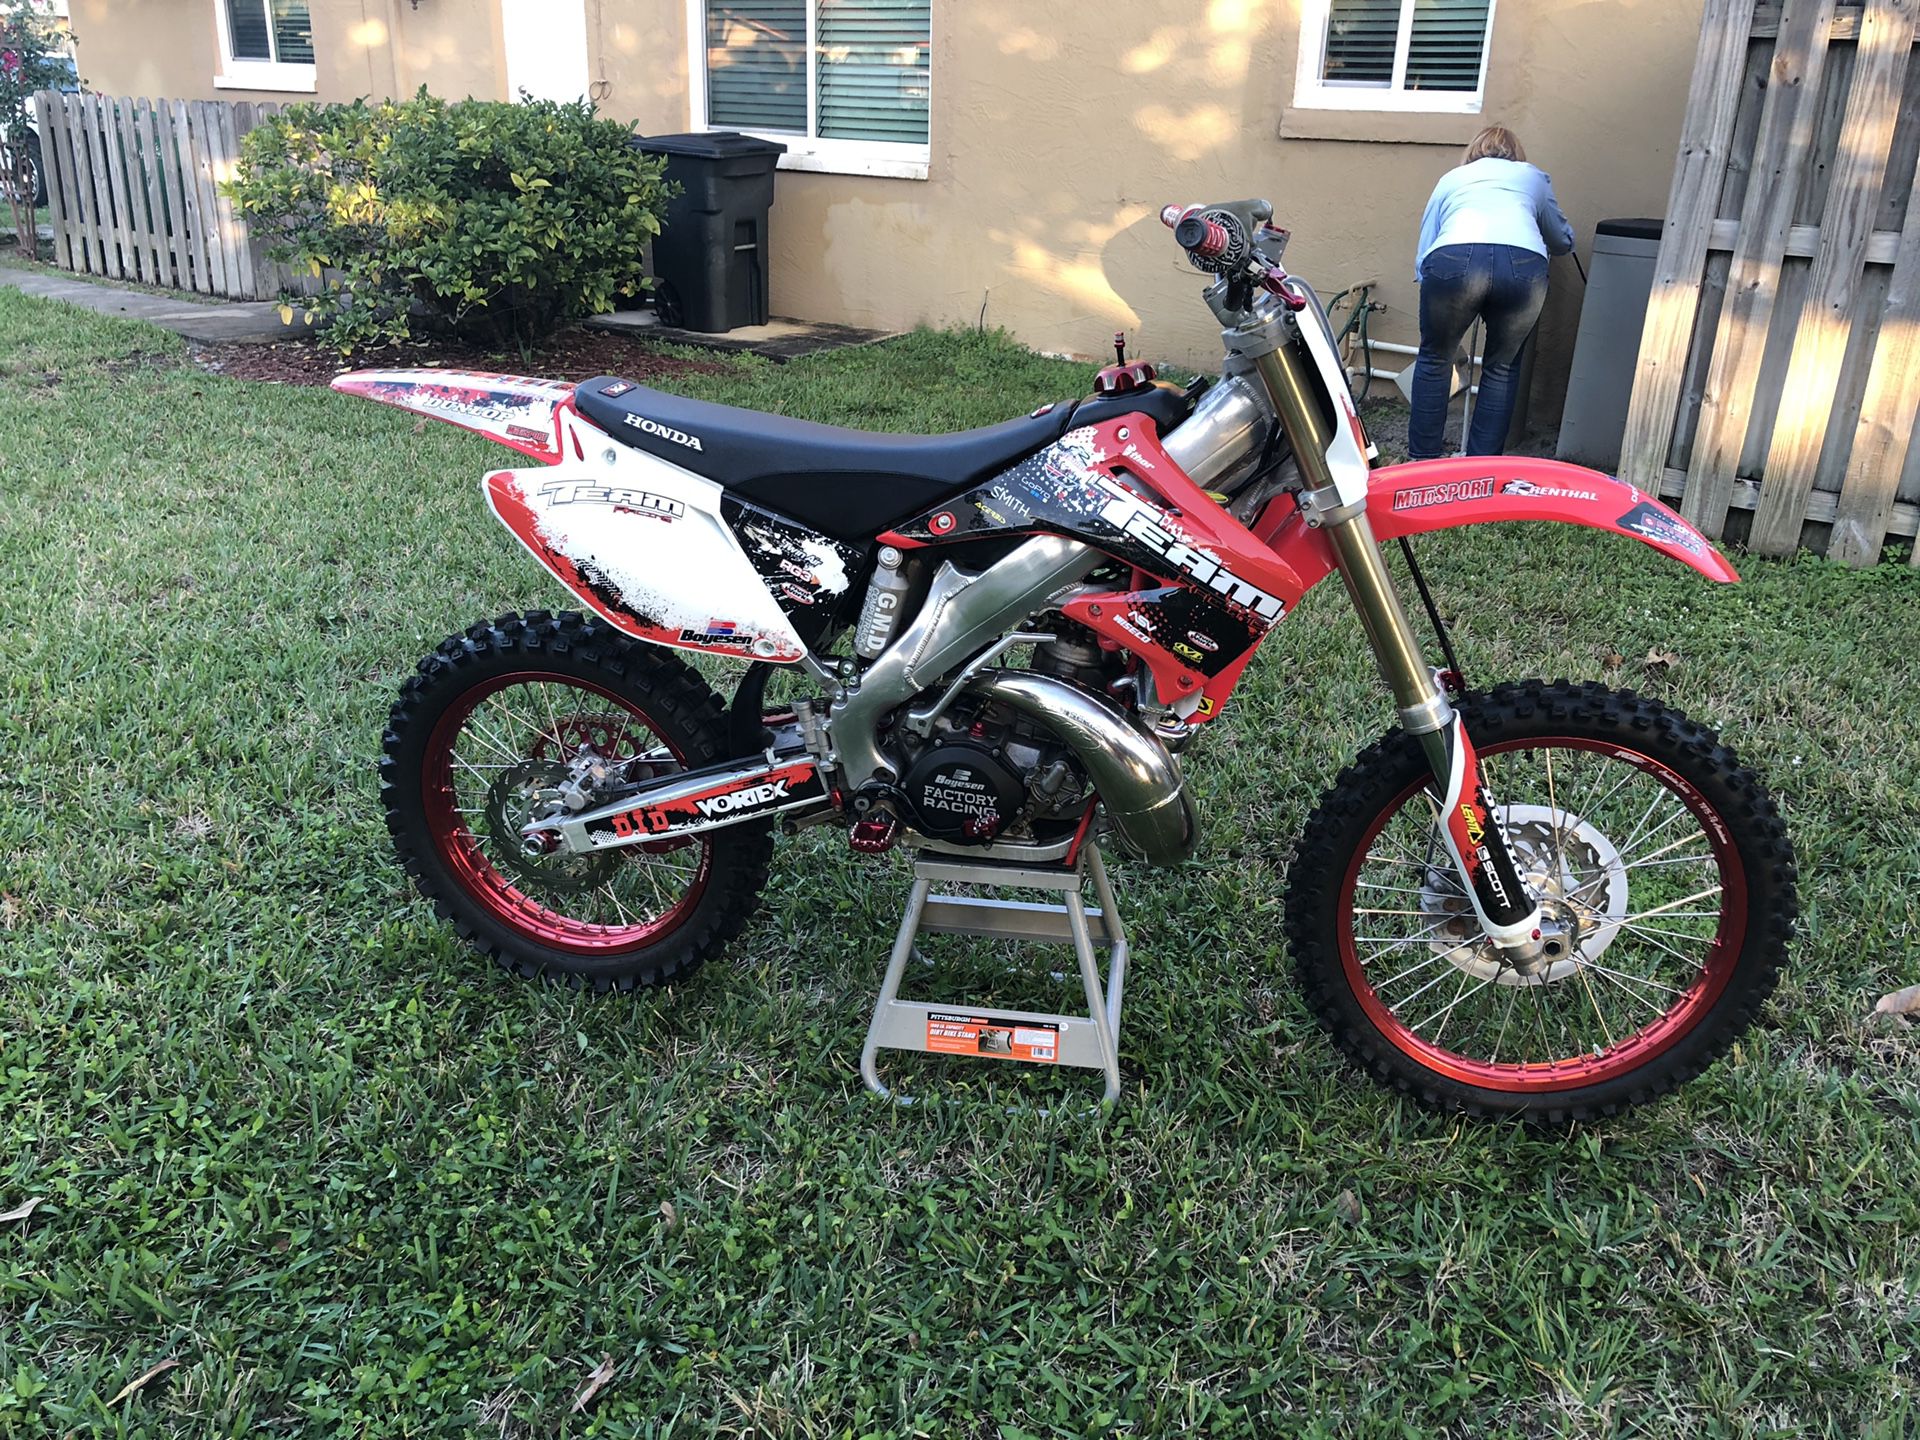 Dirt bike. 2002 Honda cr250r. Completely rebuilt. New performance top and bottom ends. New wheels, tires, controls, and everything in between. Very f